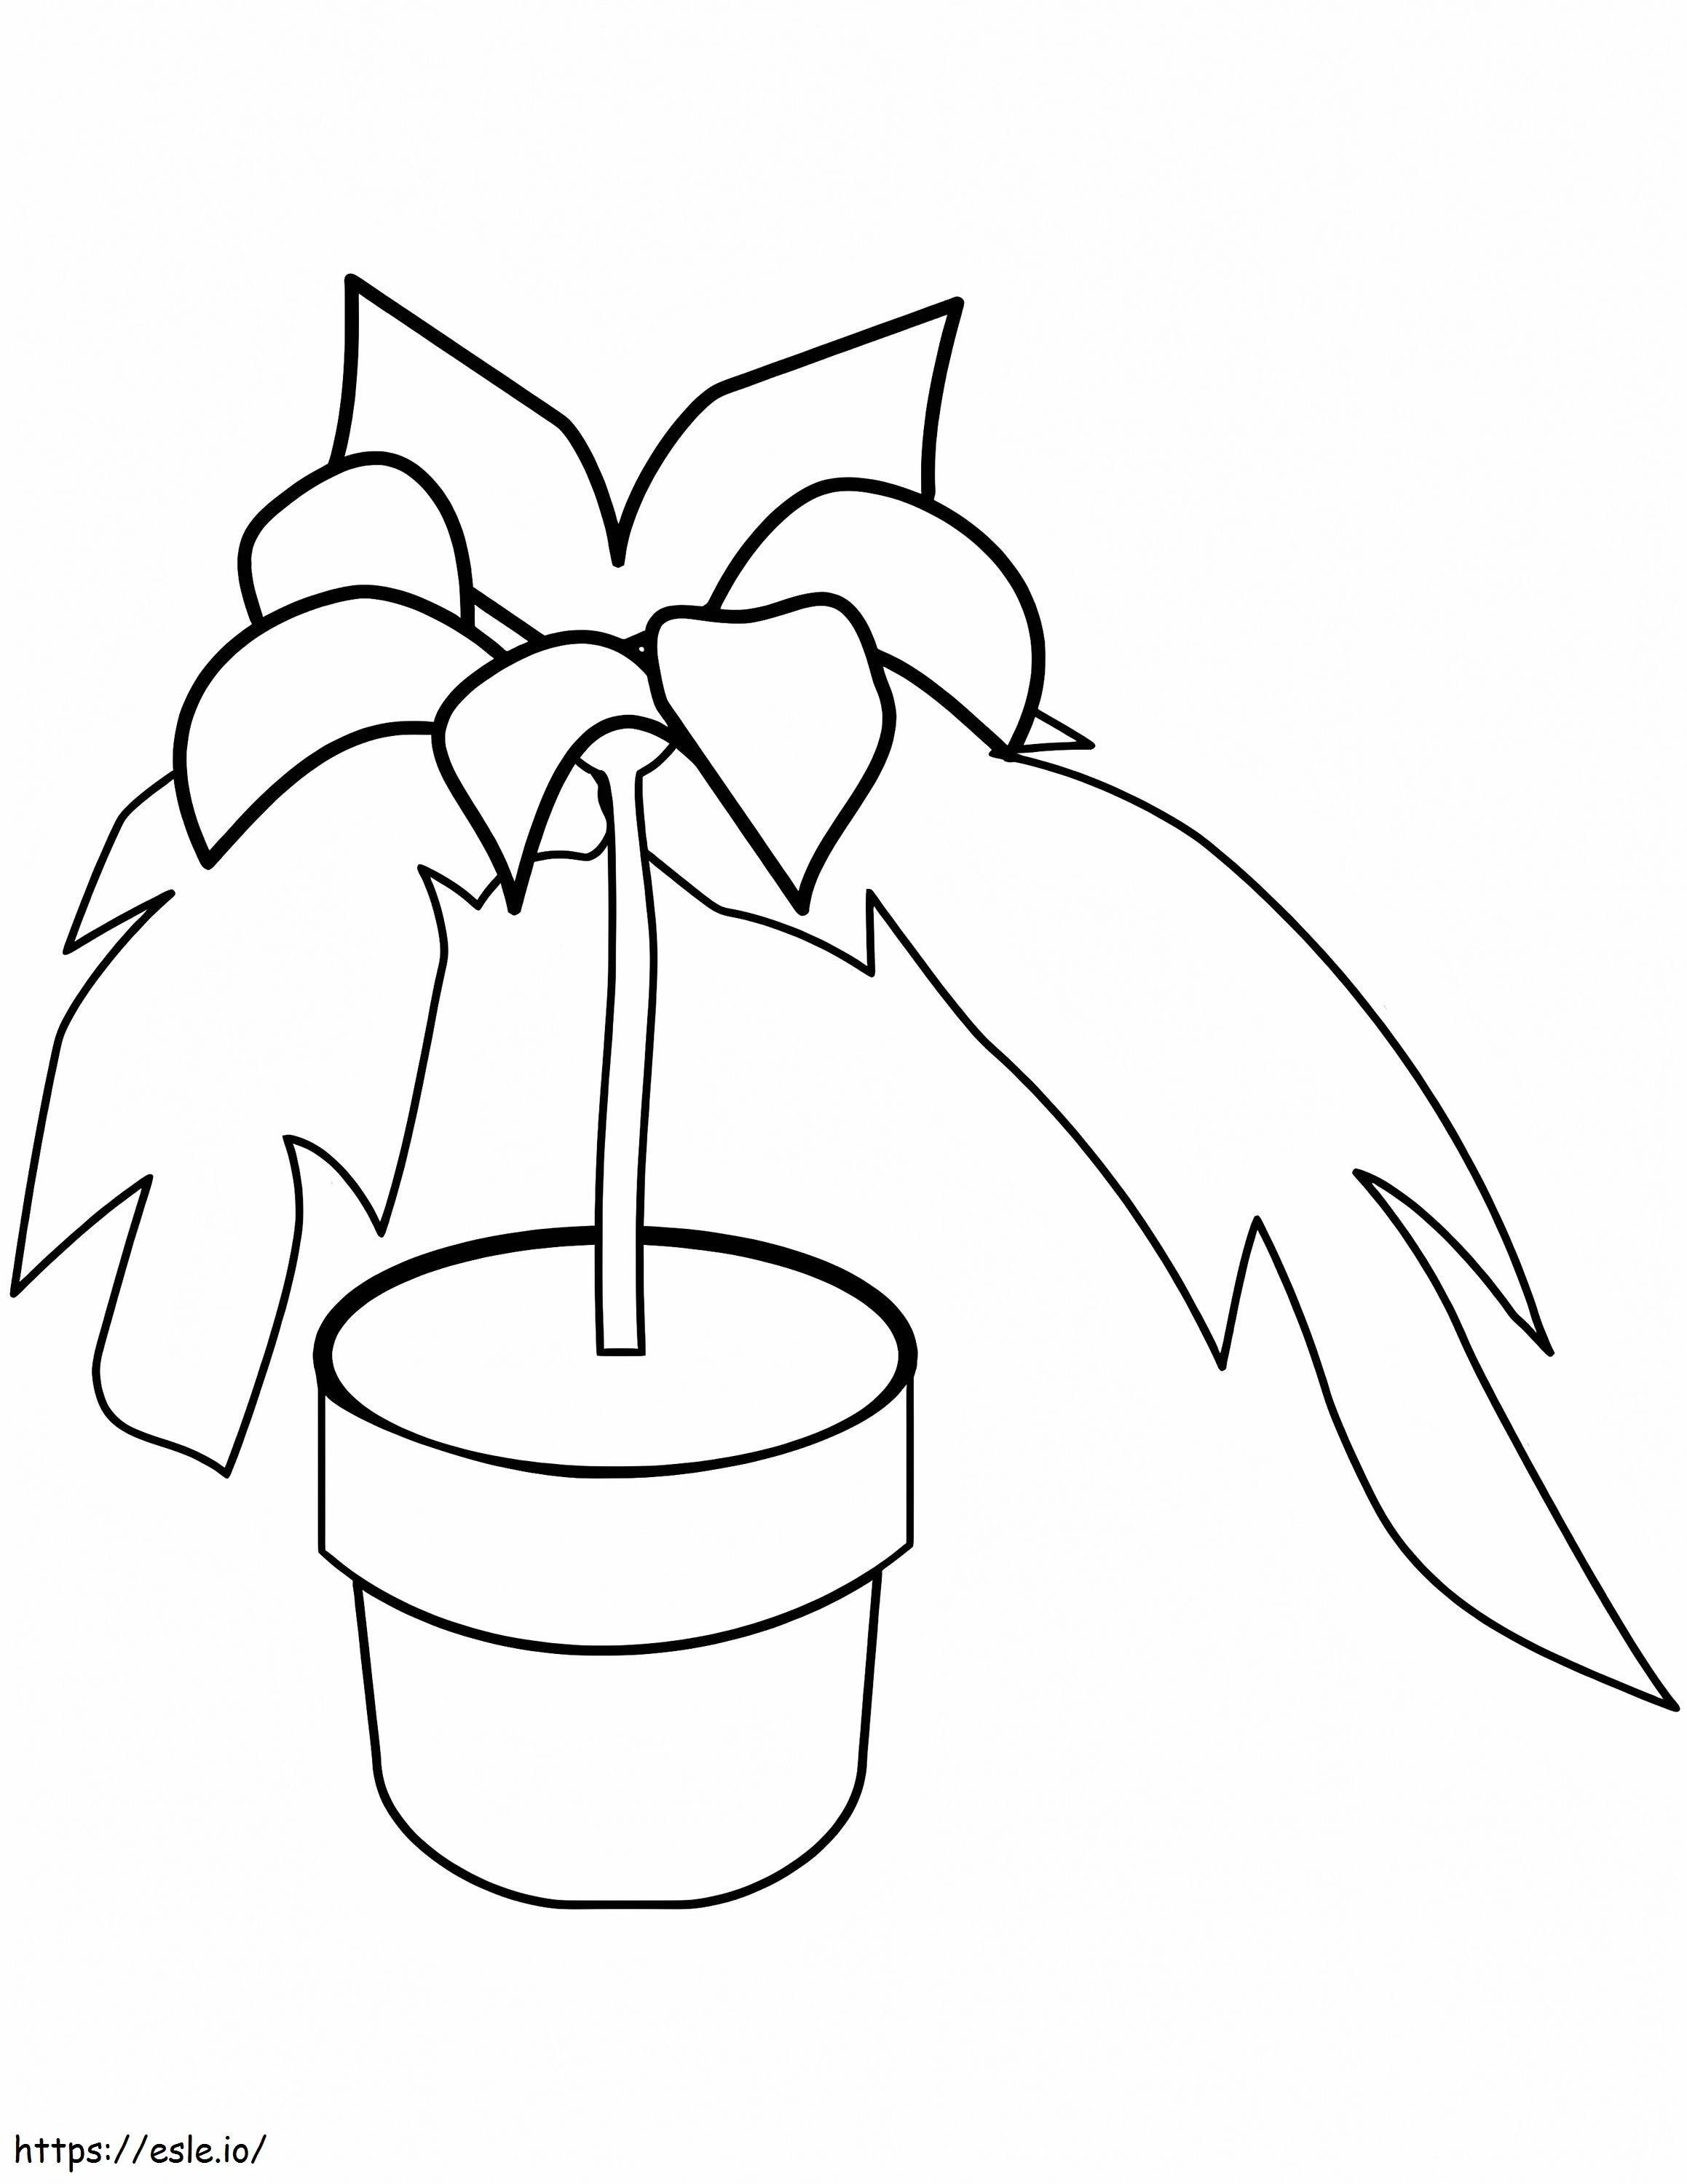 Printable Poinsettia In A Pot coloring page